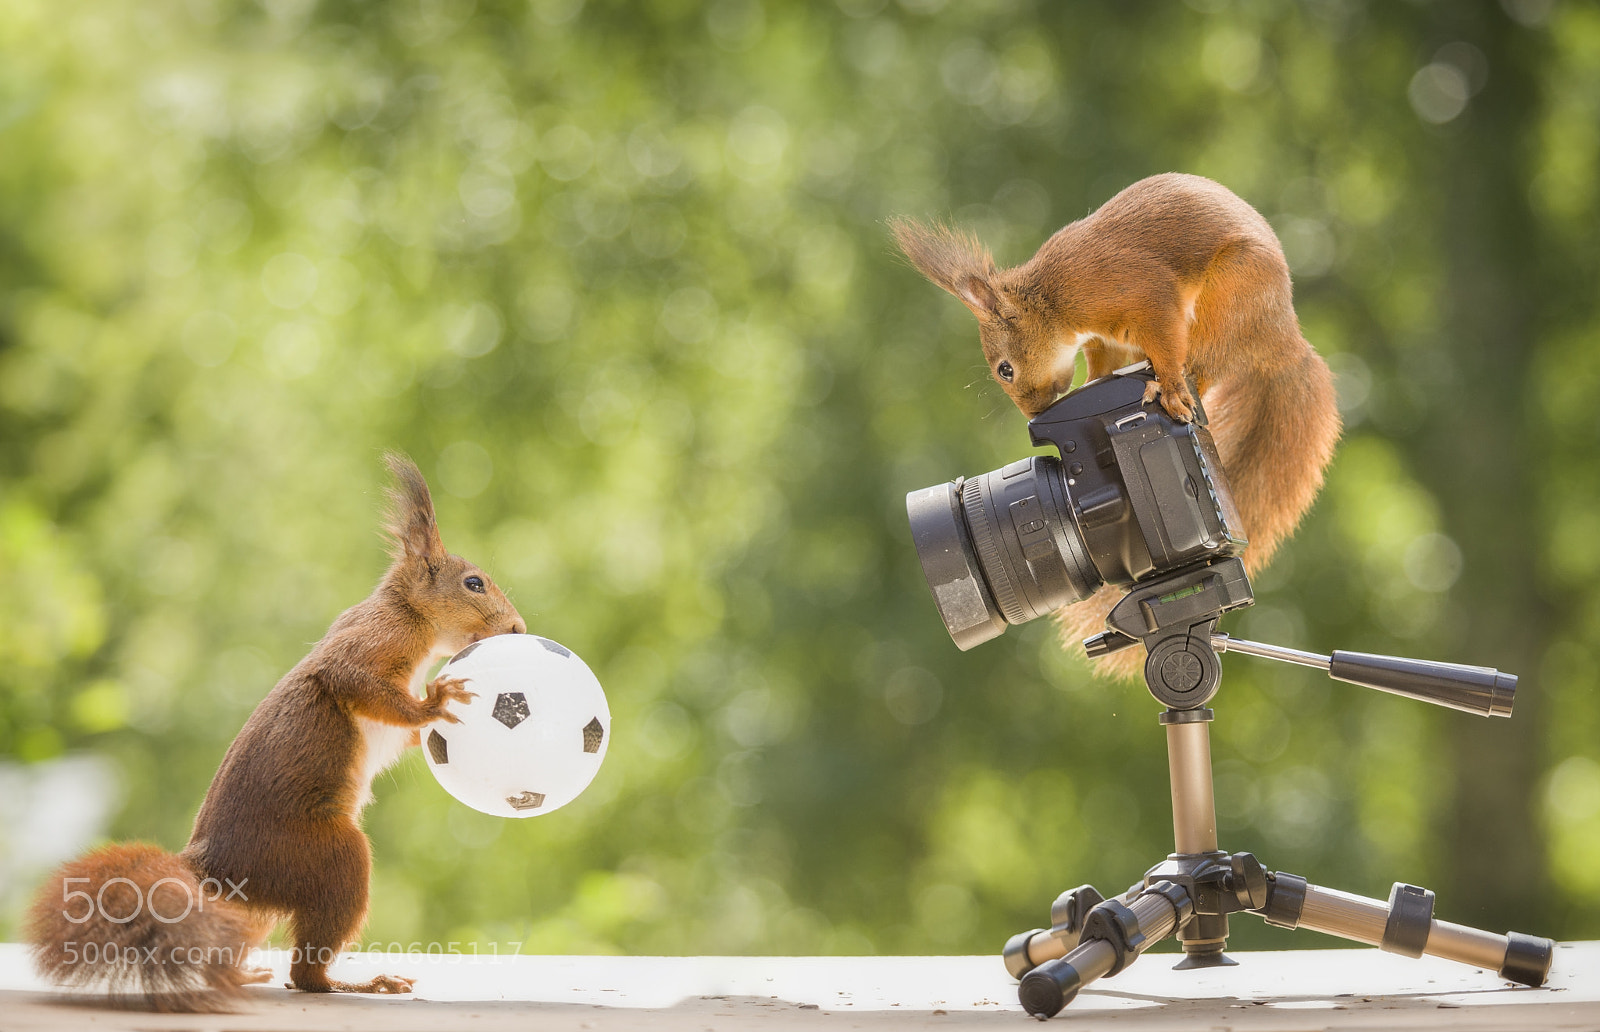 Nikon D810 sample photo. Red squirrels on a photography